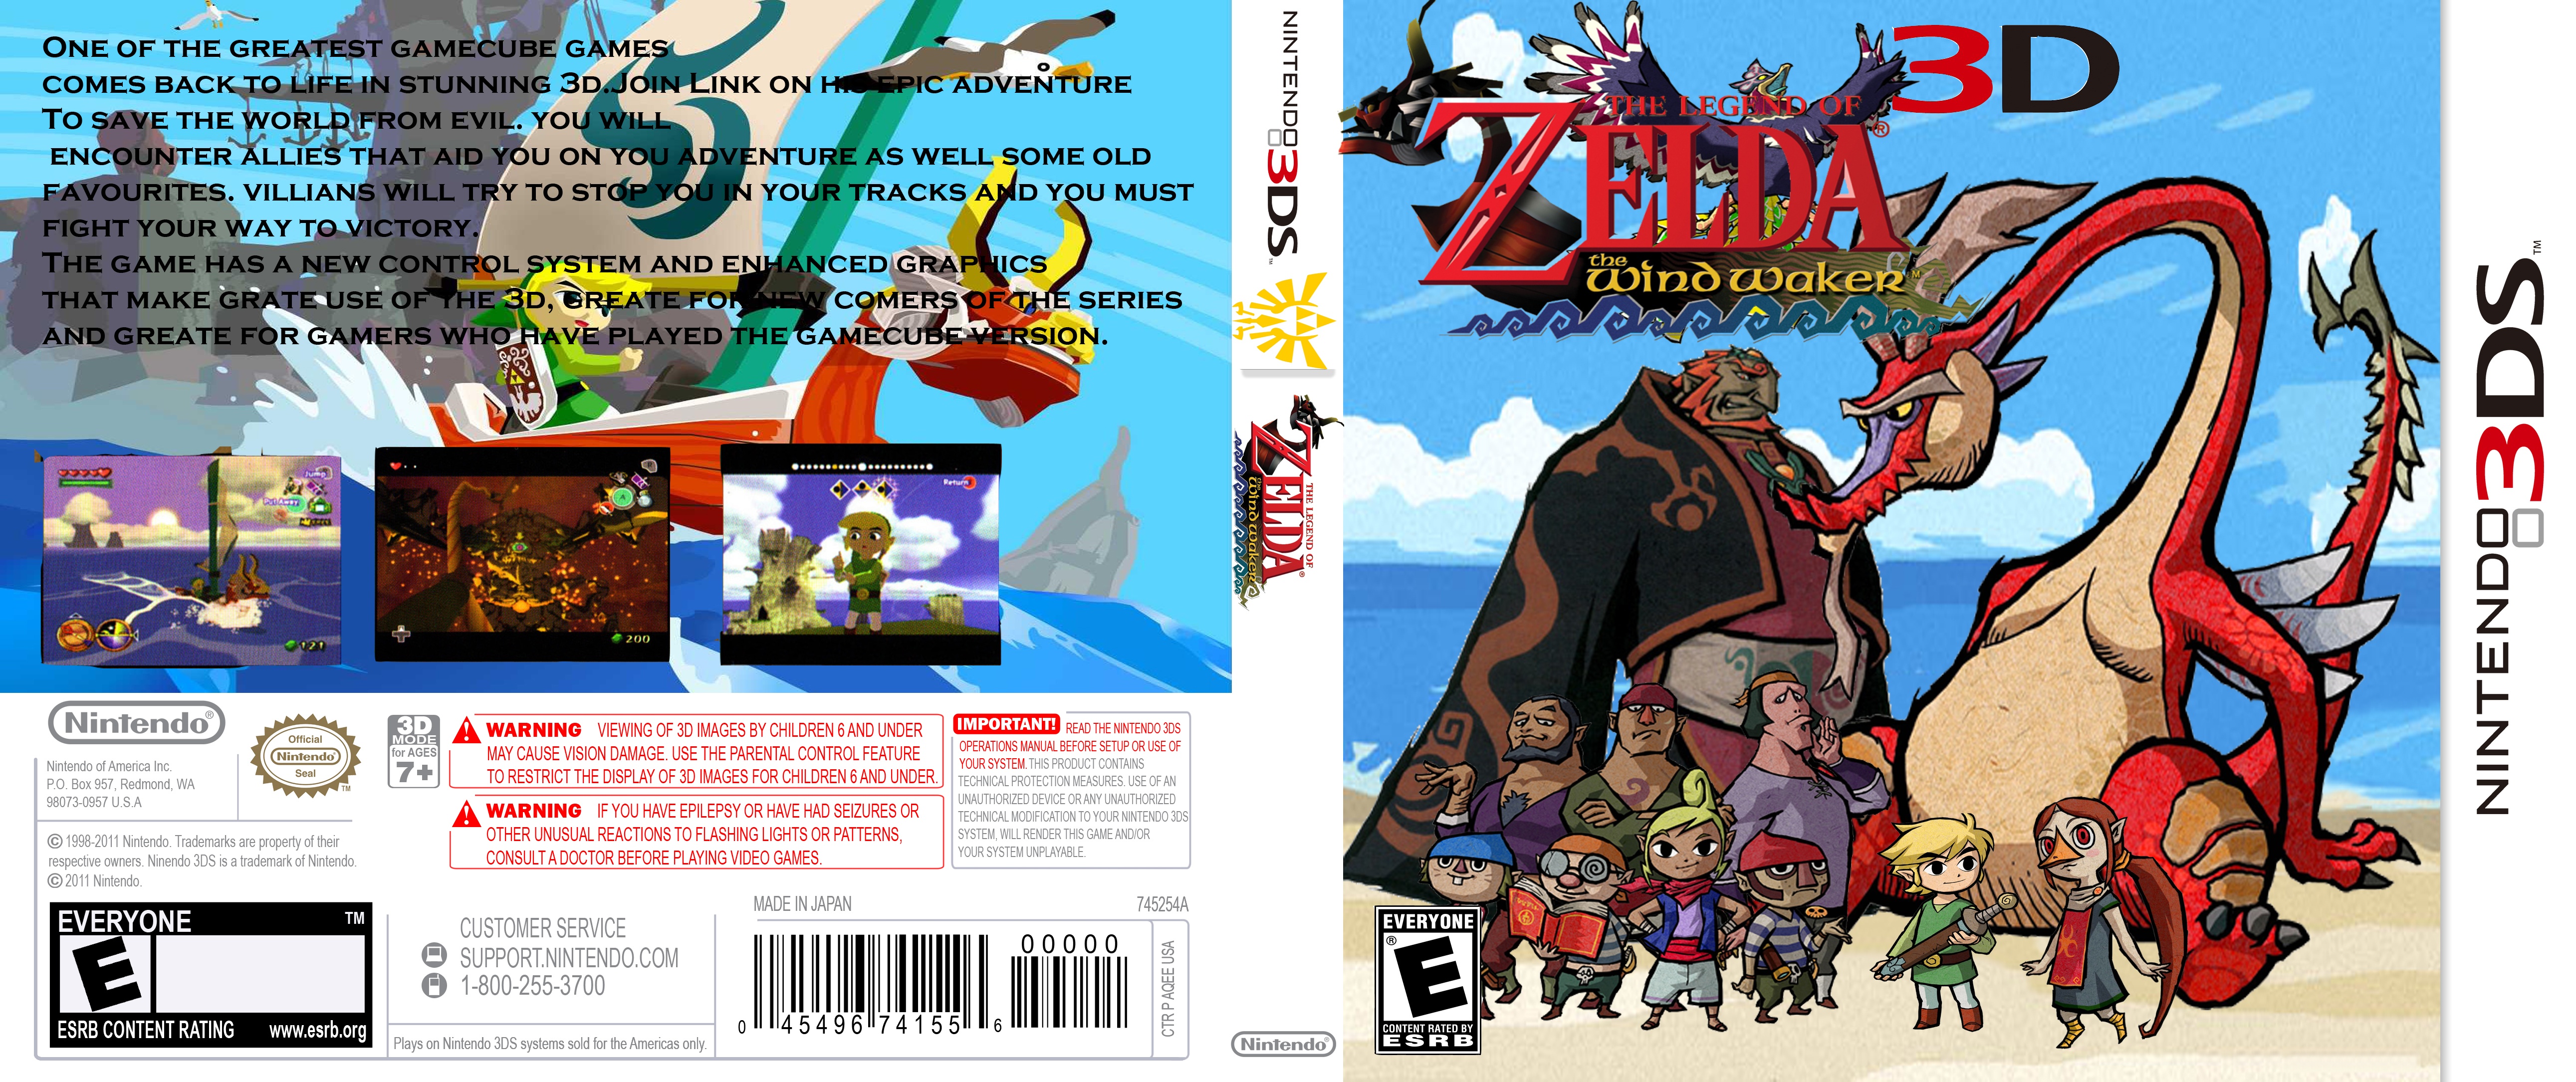 The Legend of Zelda: The Wind Waker 3D box cover